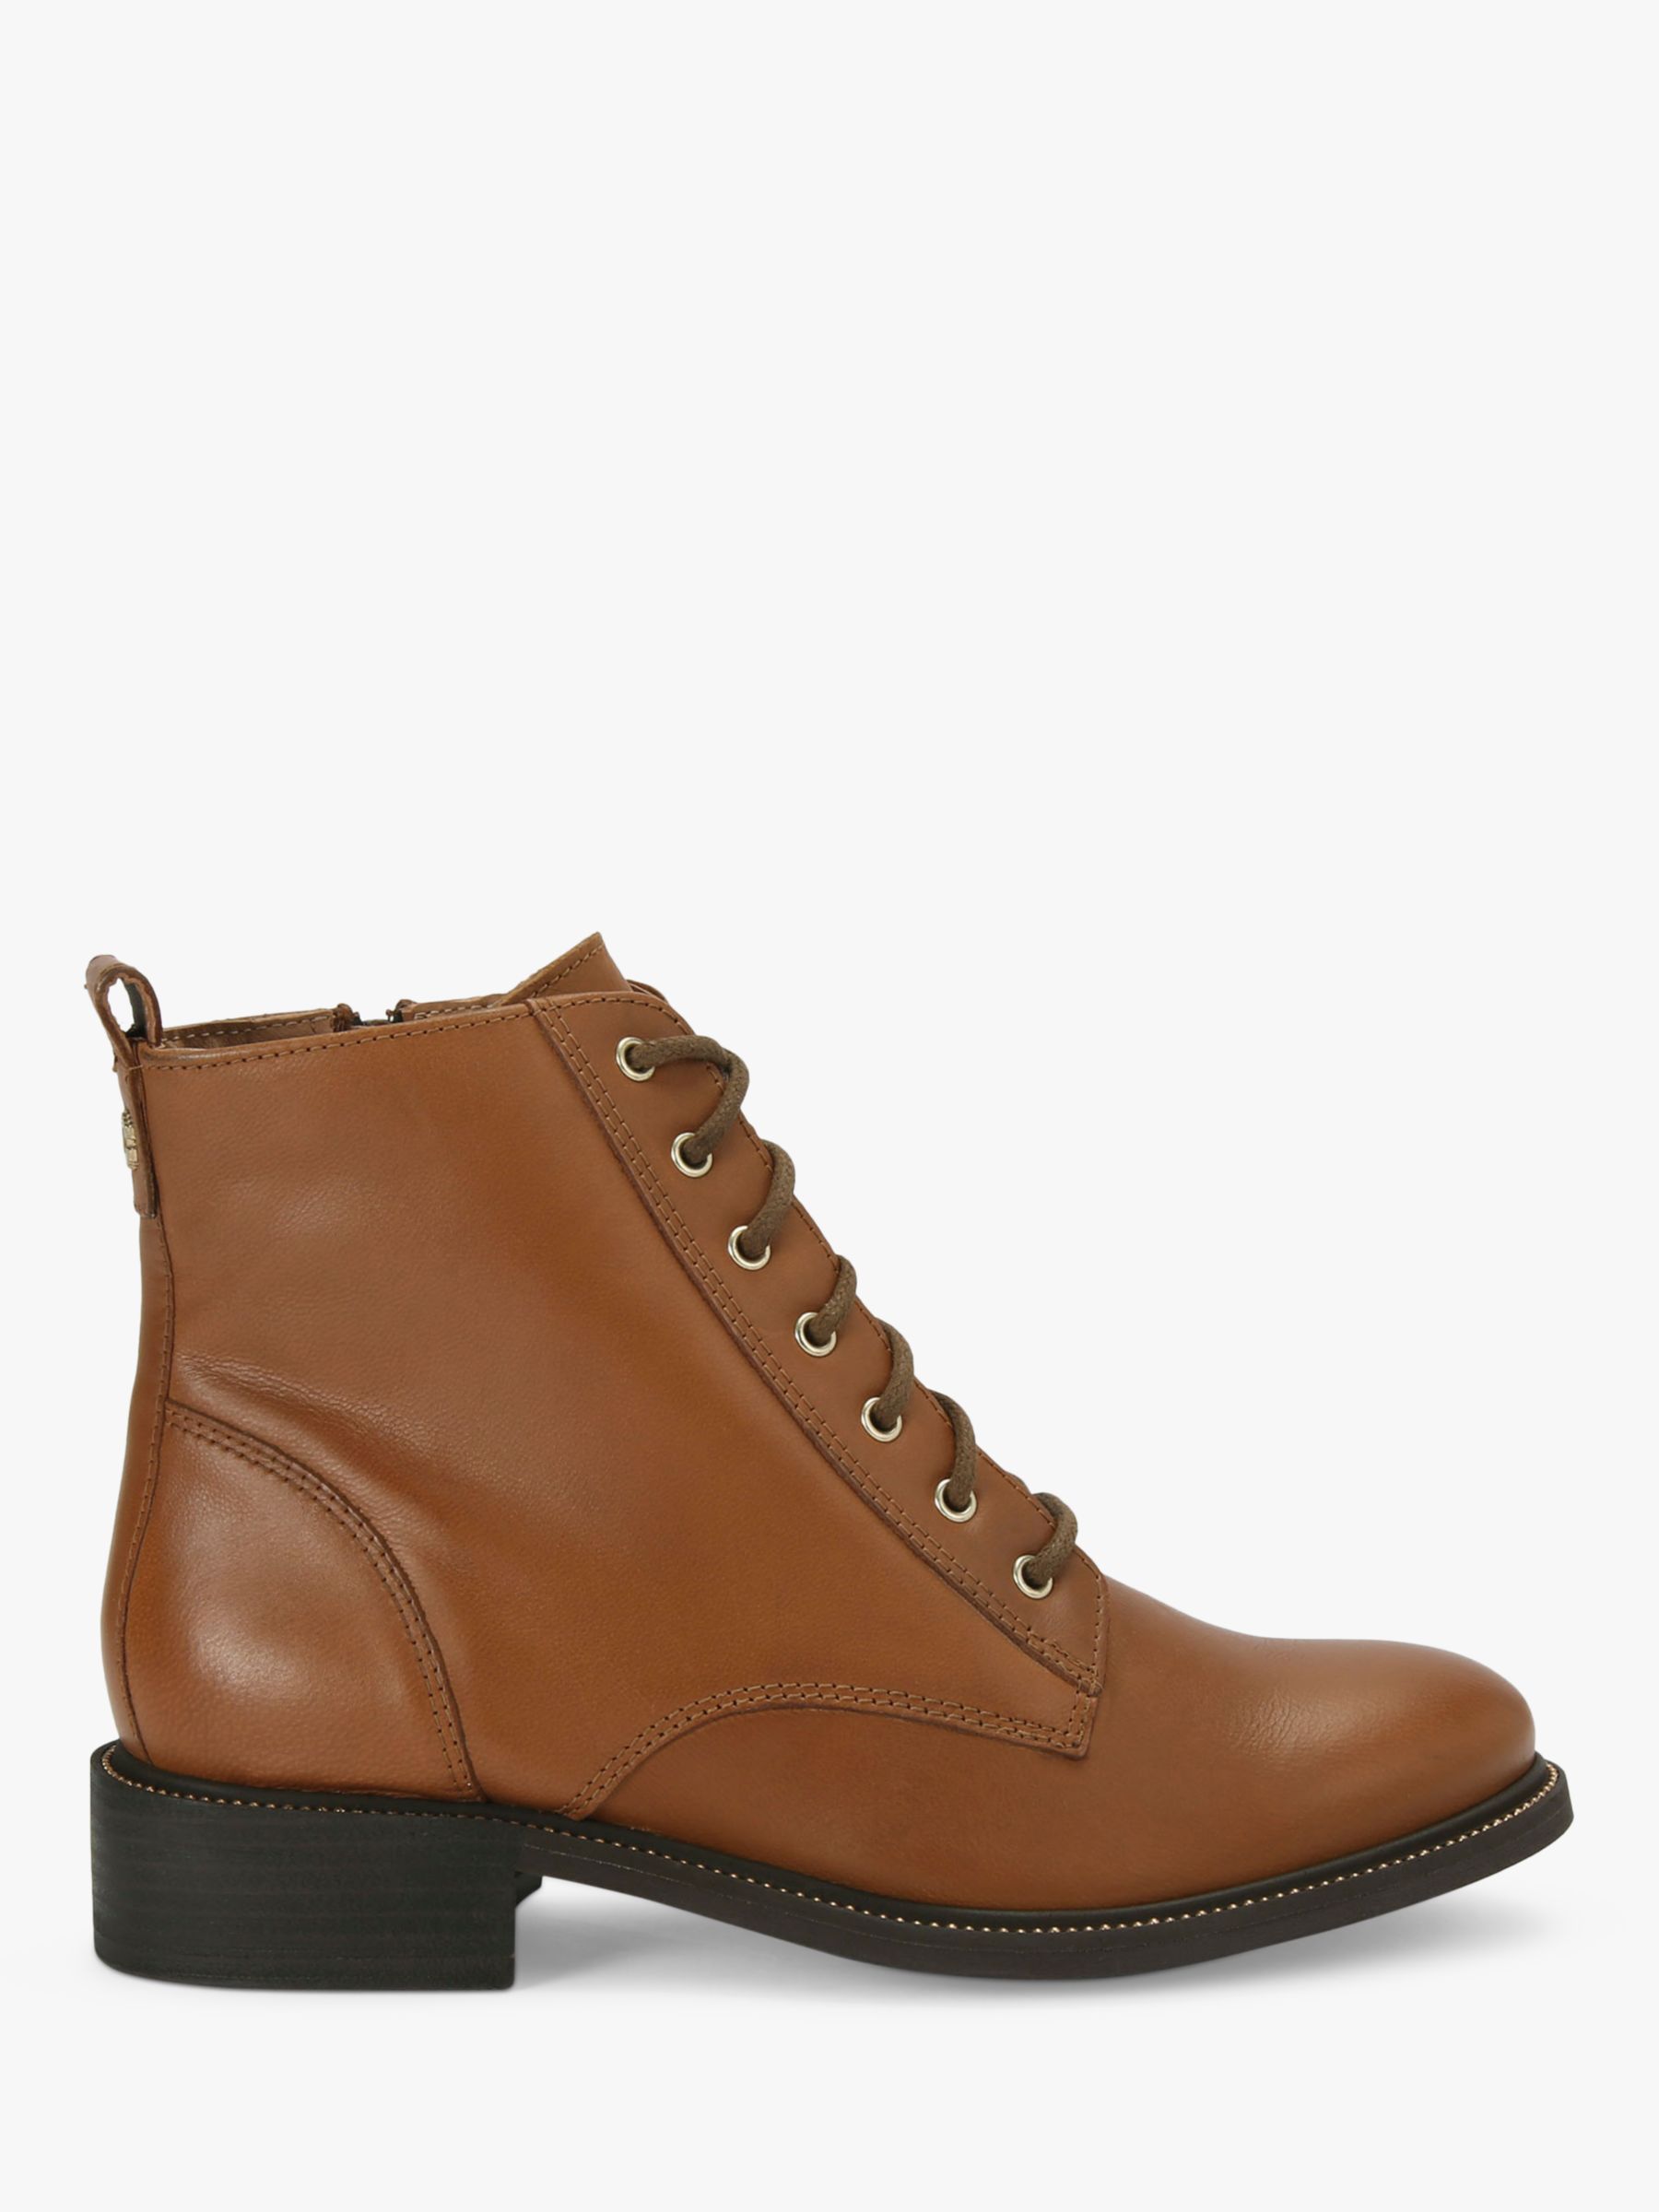 Carvela Spike Stud Detail Leather Ankle Boots, Brown Tan at John Lewis ...